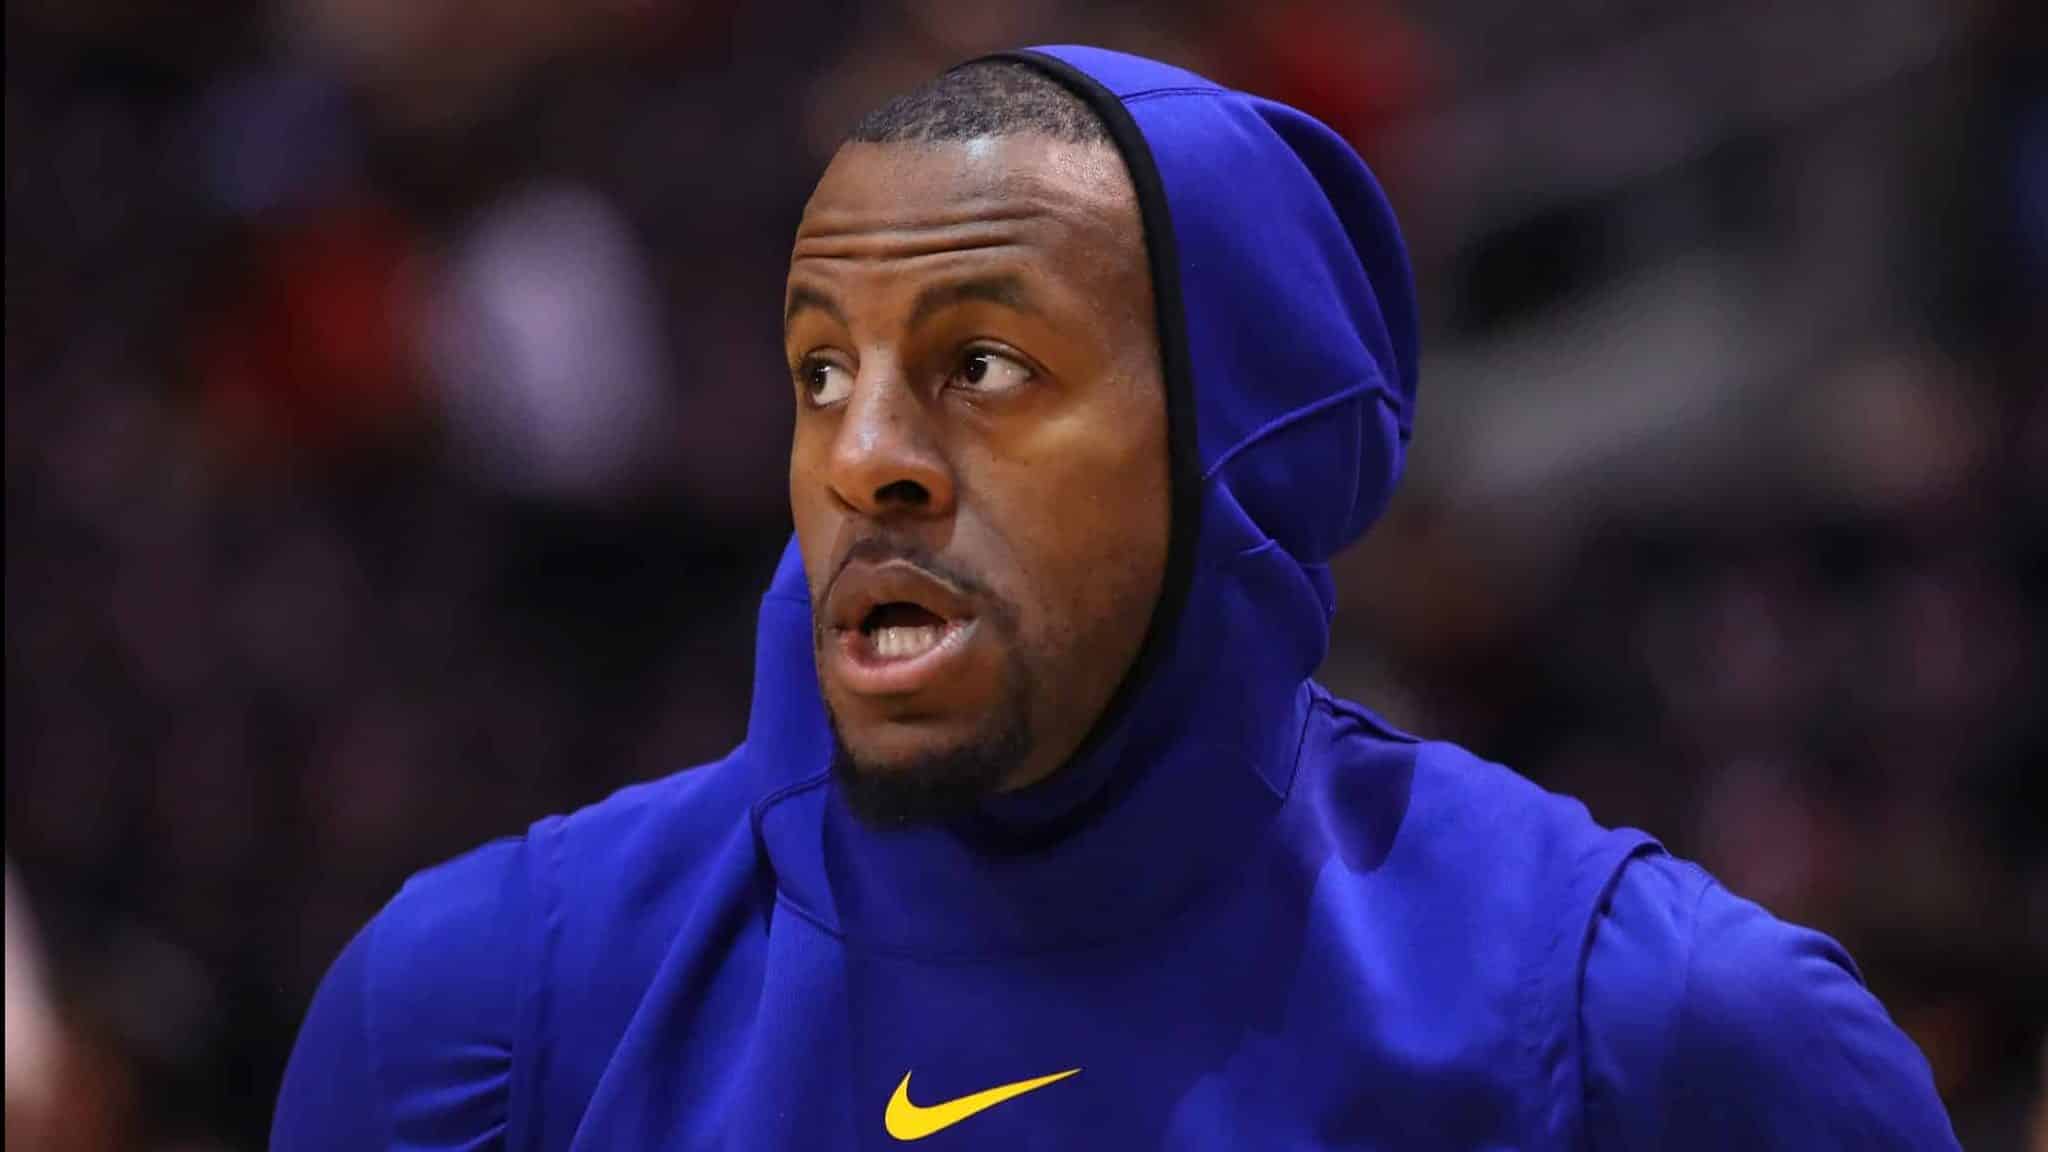 TORONTO, ONTARIO - MAY 30: Andre Iguodala #9 of the Golden State Warriors warms up before Game One of the 2019 NBA Finals against the Toronto Raptors at Scotiabank Arena on May 30, 2019 in Toronto, Canada. NOTE TO USER: User expressly acknowledges and agrees that, by downloading and or using this photograph, User is consenting to the terms and conditions of the Getty Images License Agreement.